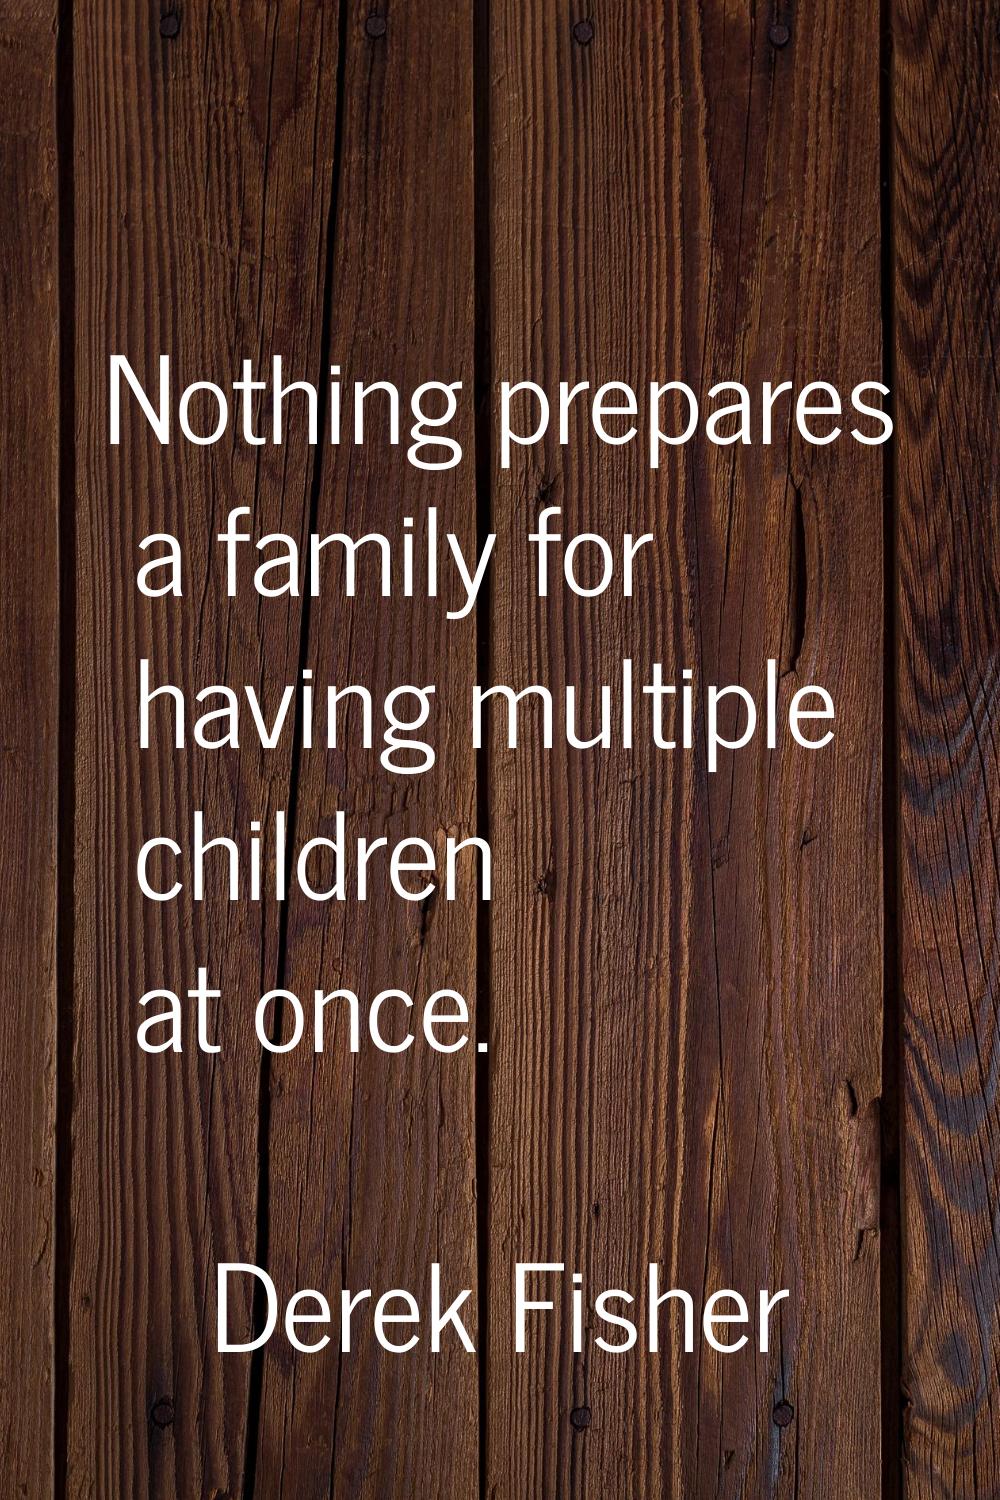 Nothing prepares a family for having multiple children at once.